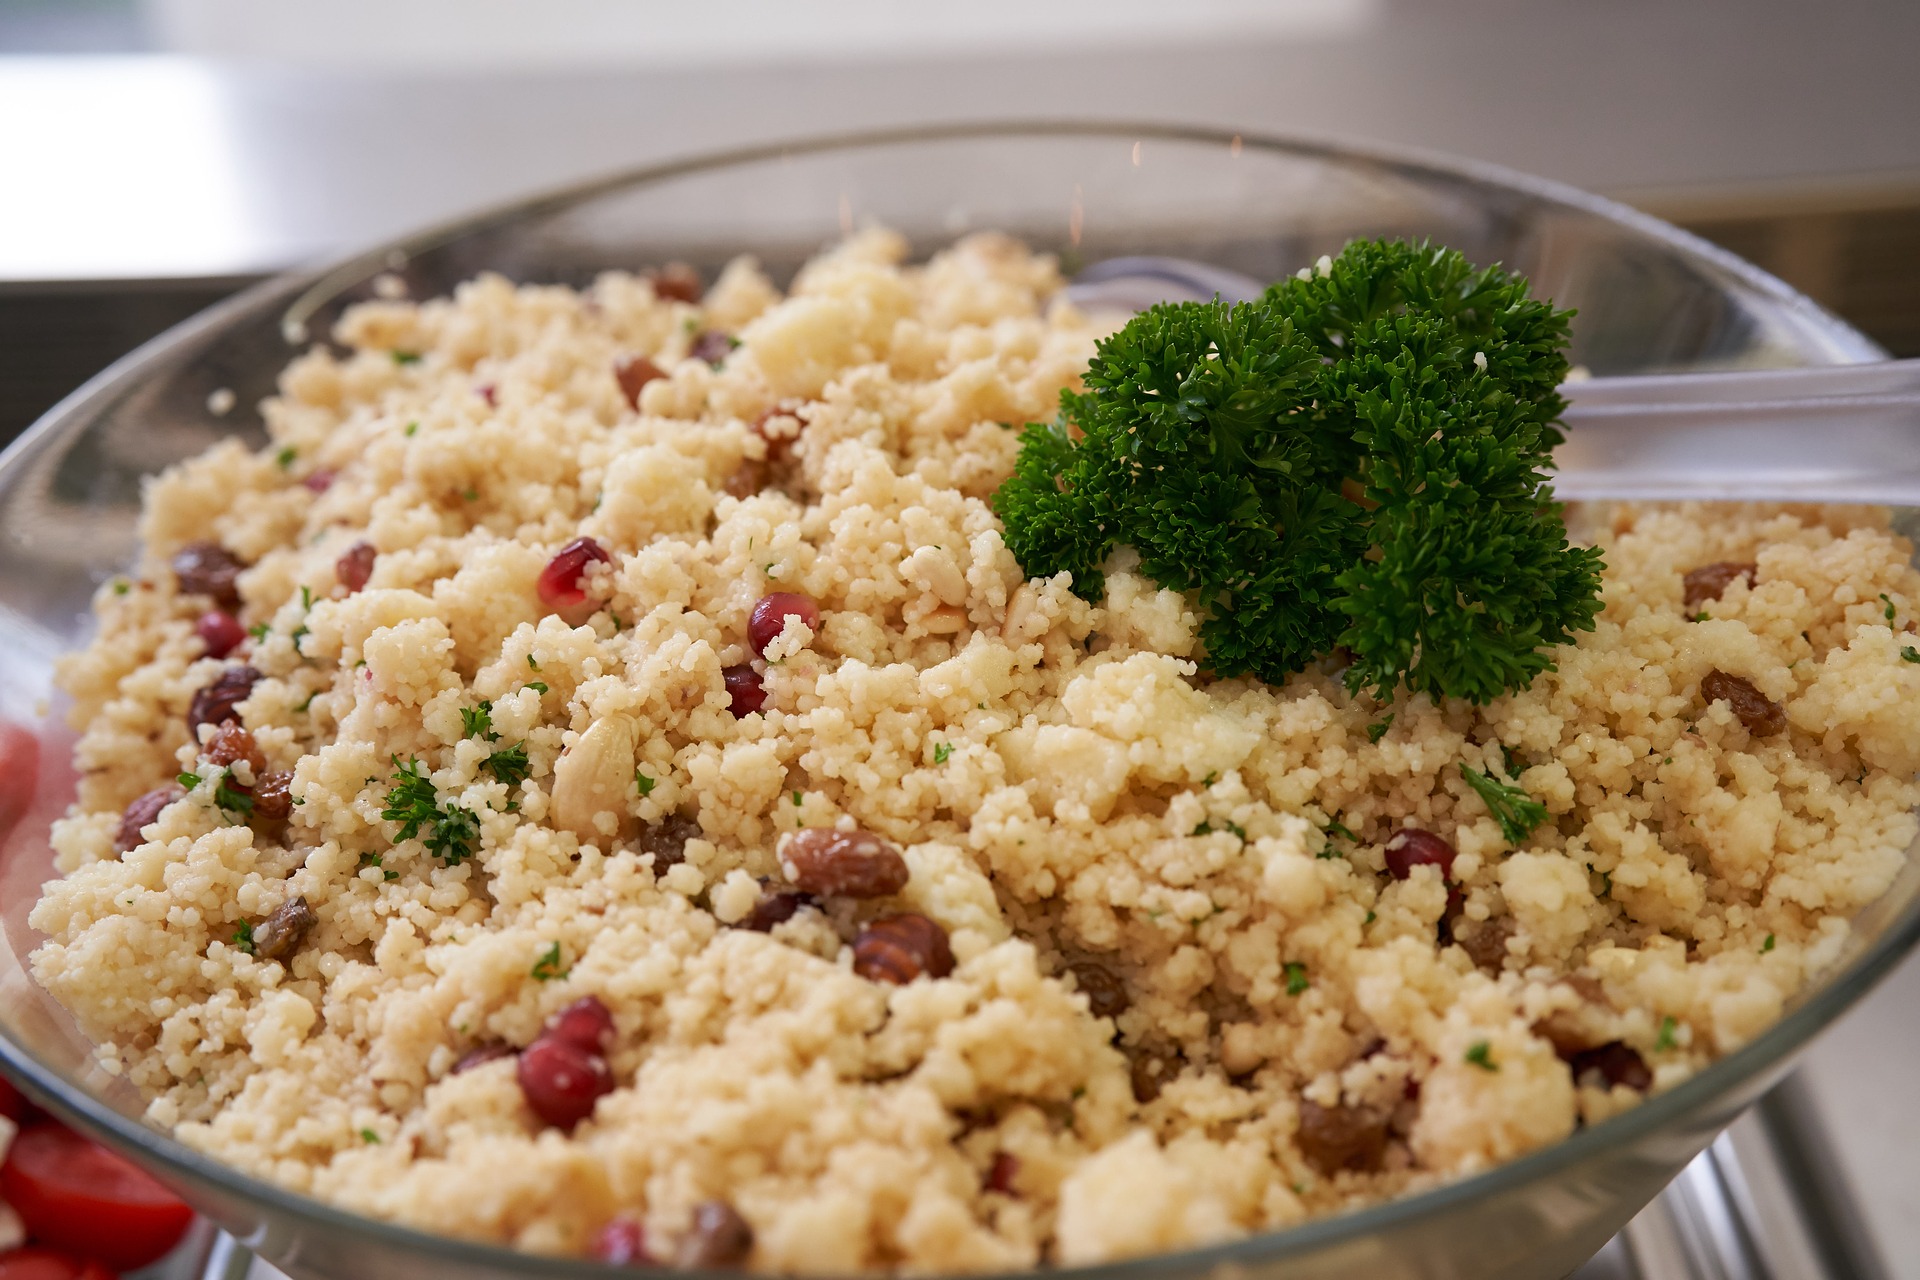 Image of barley wheat salad with raisins and apples